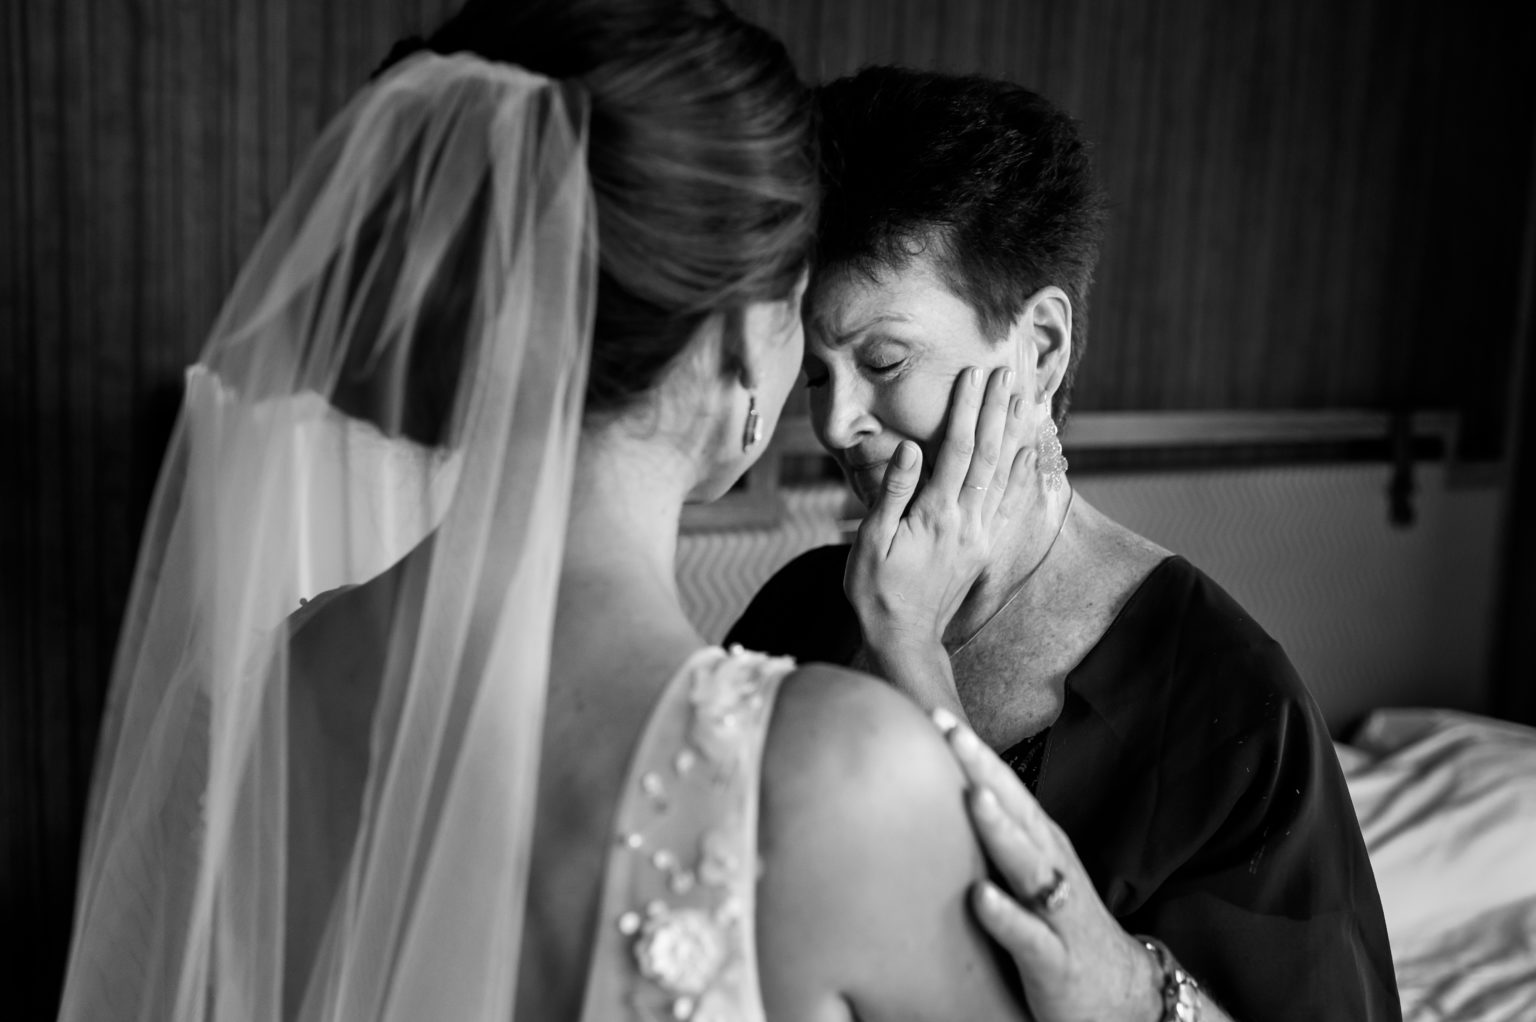 Bride places had on crying mom's cheek to console her after seeing her in her dress for the first time.